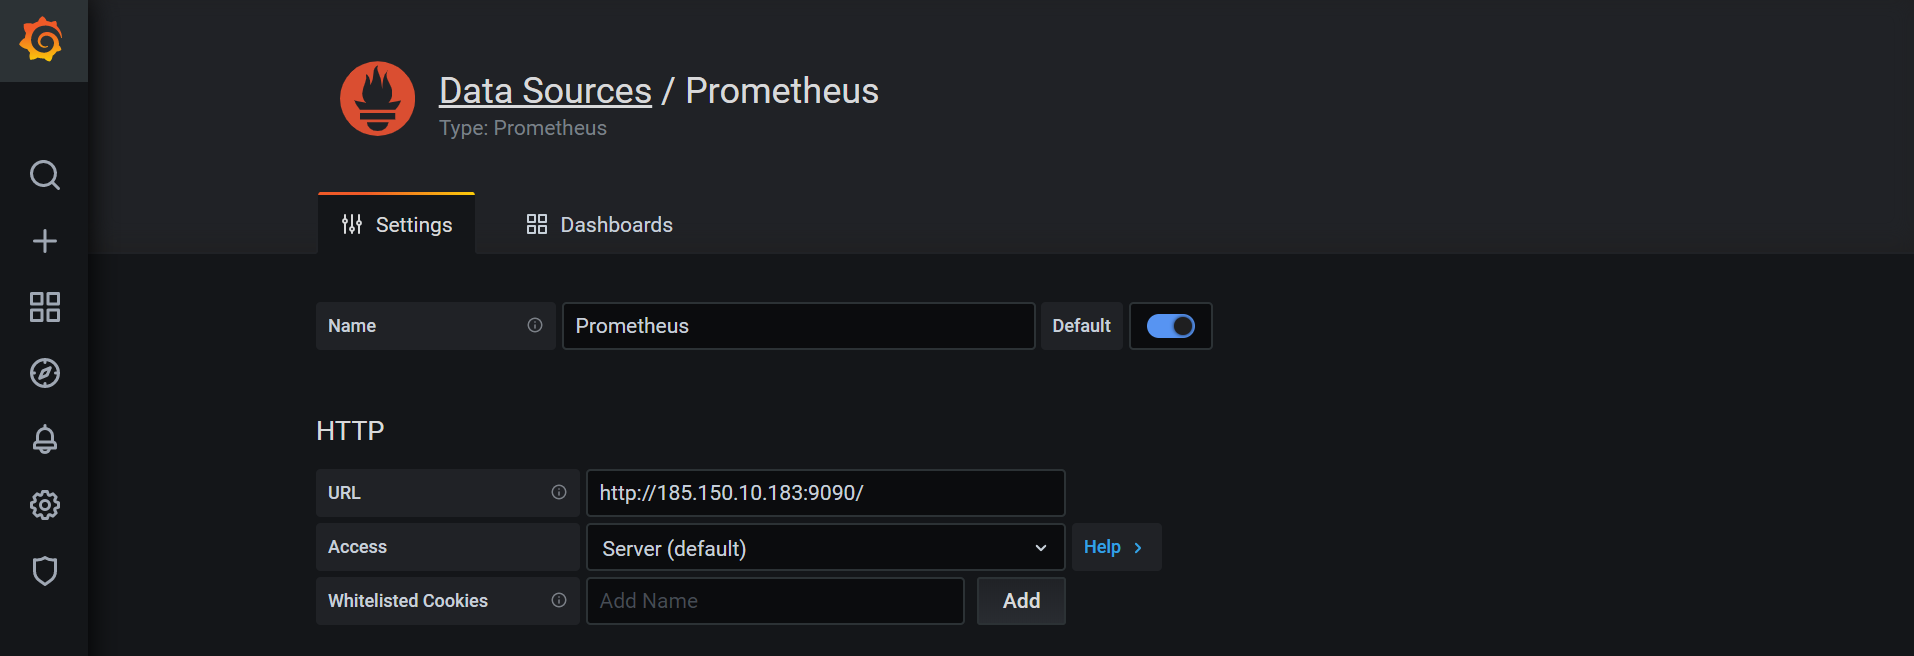 A picture showing setting up the Prometheus data source in Grafana.